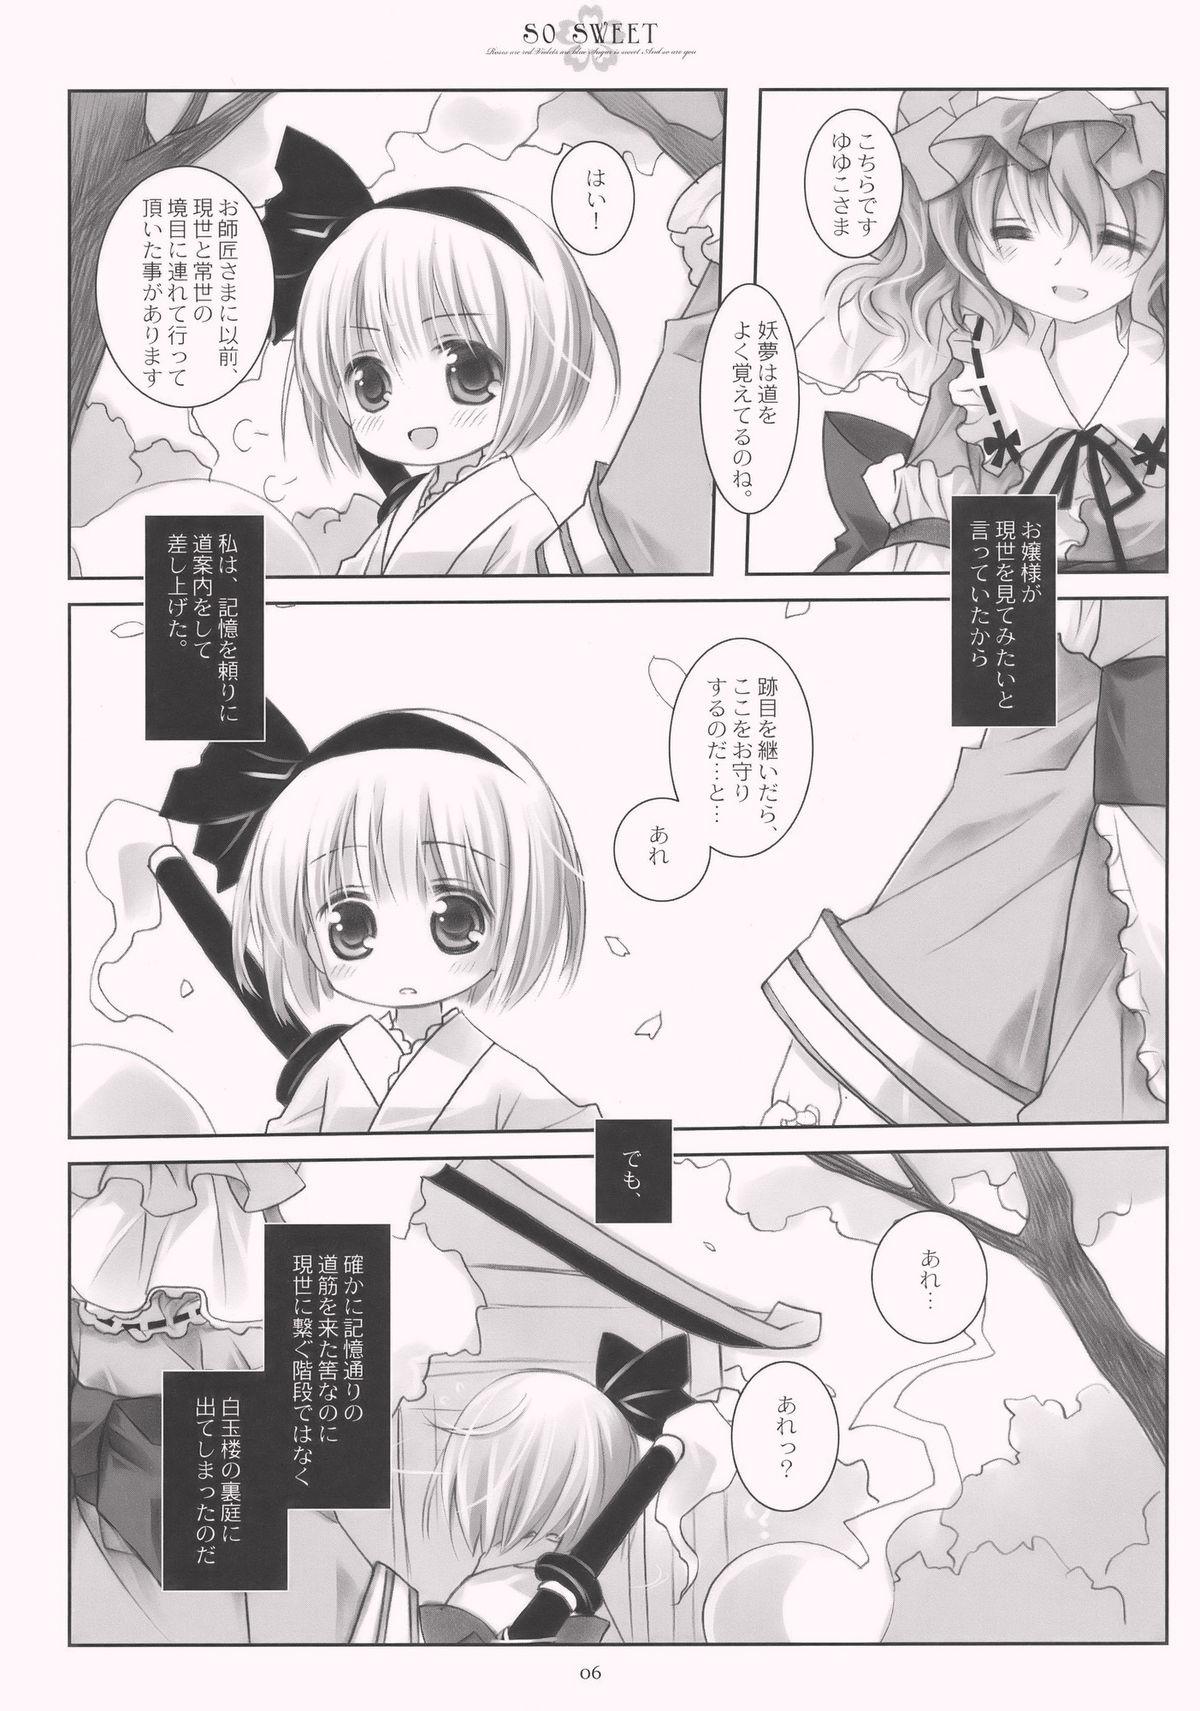 Brazzers SO SWEET - Touhou project Por - Page 6